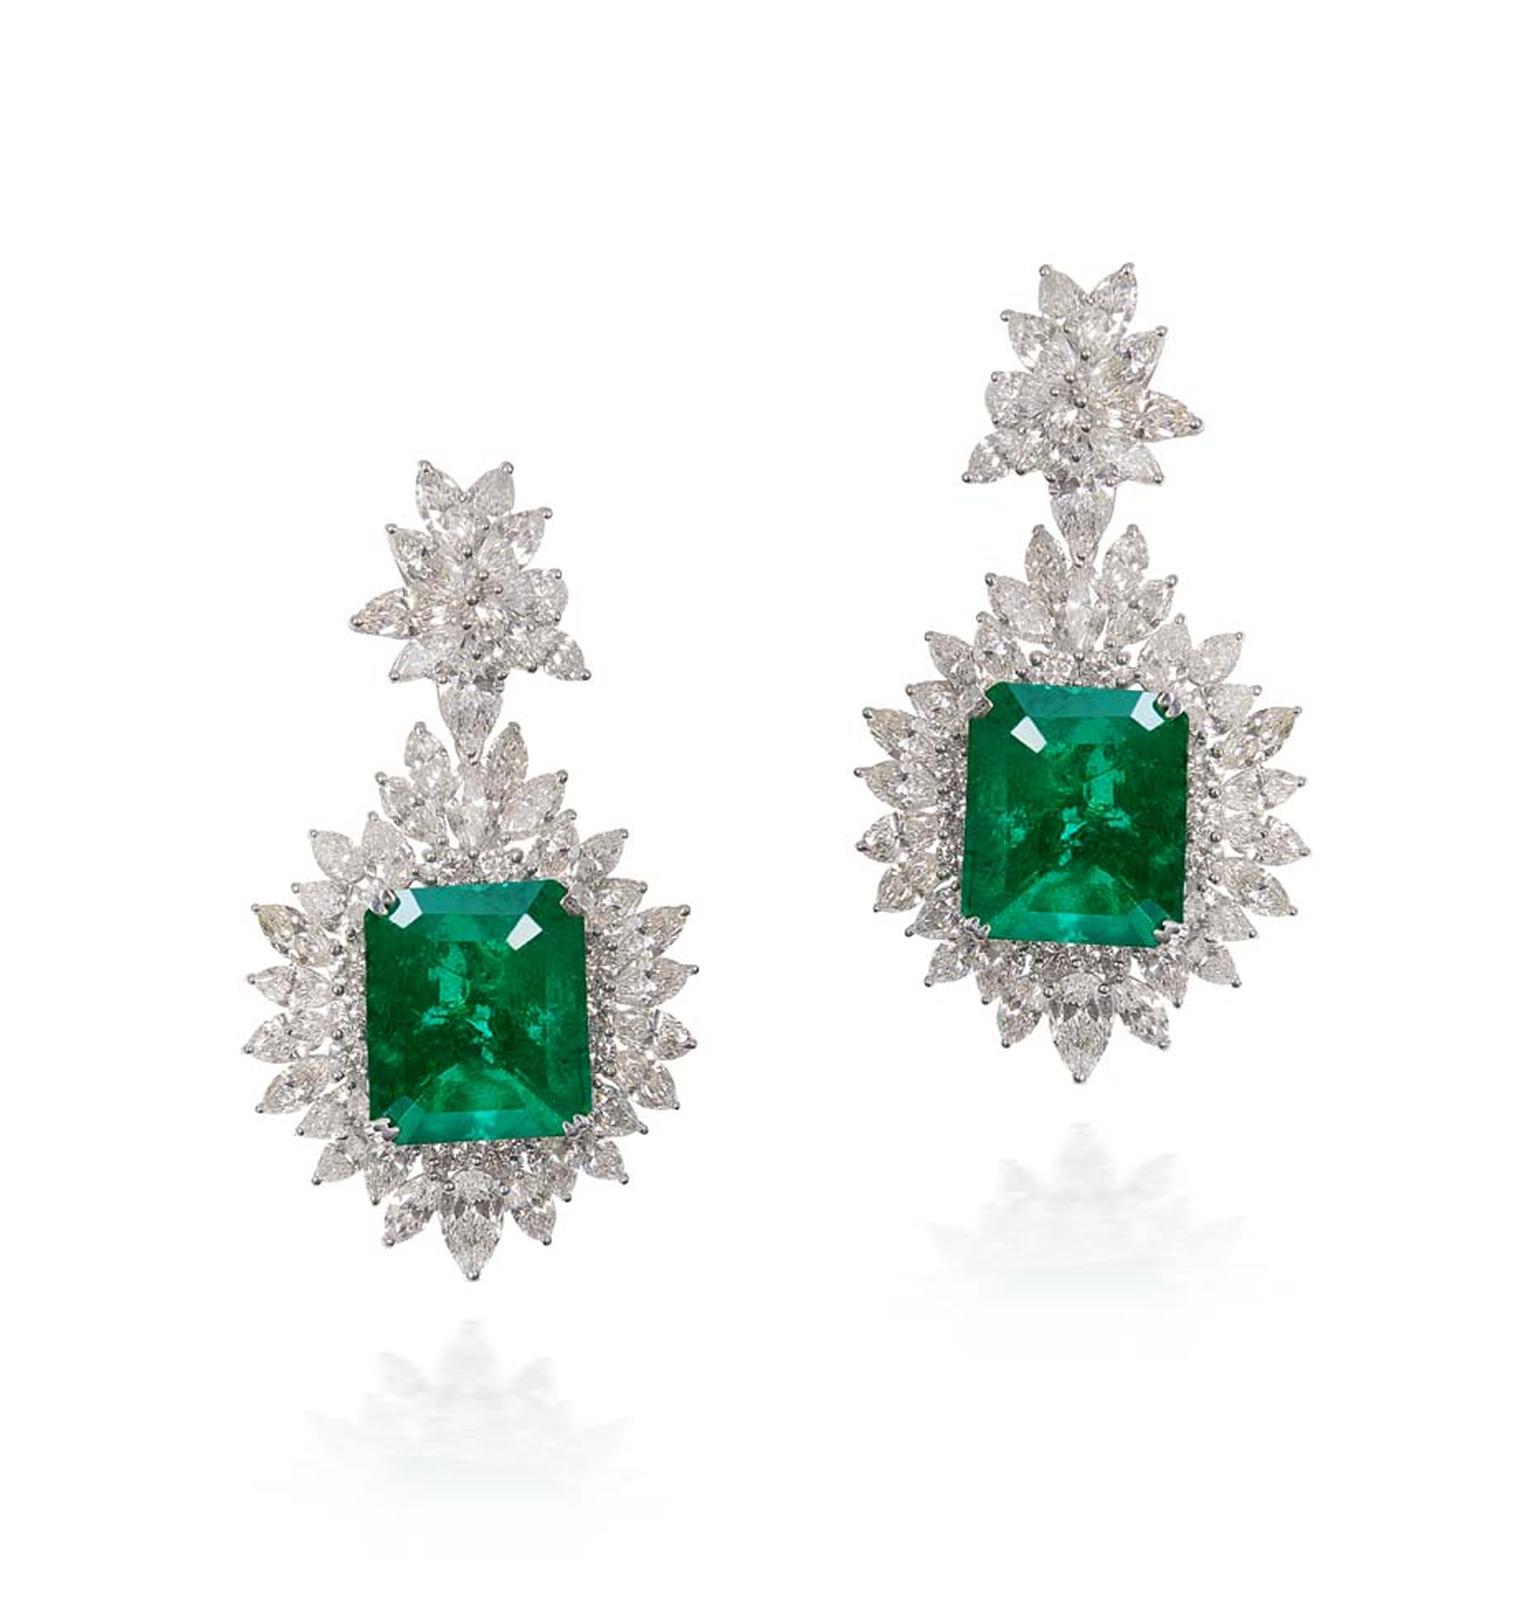 Lot 9, a pair of earrings by Talwarsons Jewellers with two extremely rare Gemfields emeralds as their centrepiece (estimate: INR 3,300,000 - 4,000,000; $55,000 - 67,000)